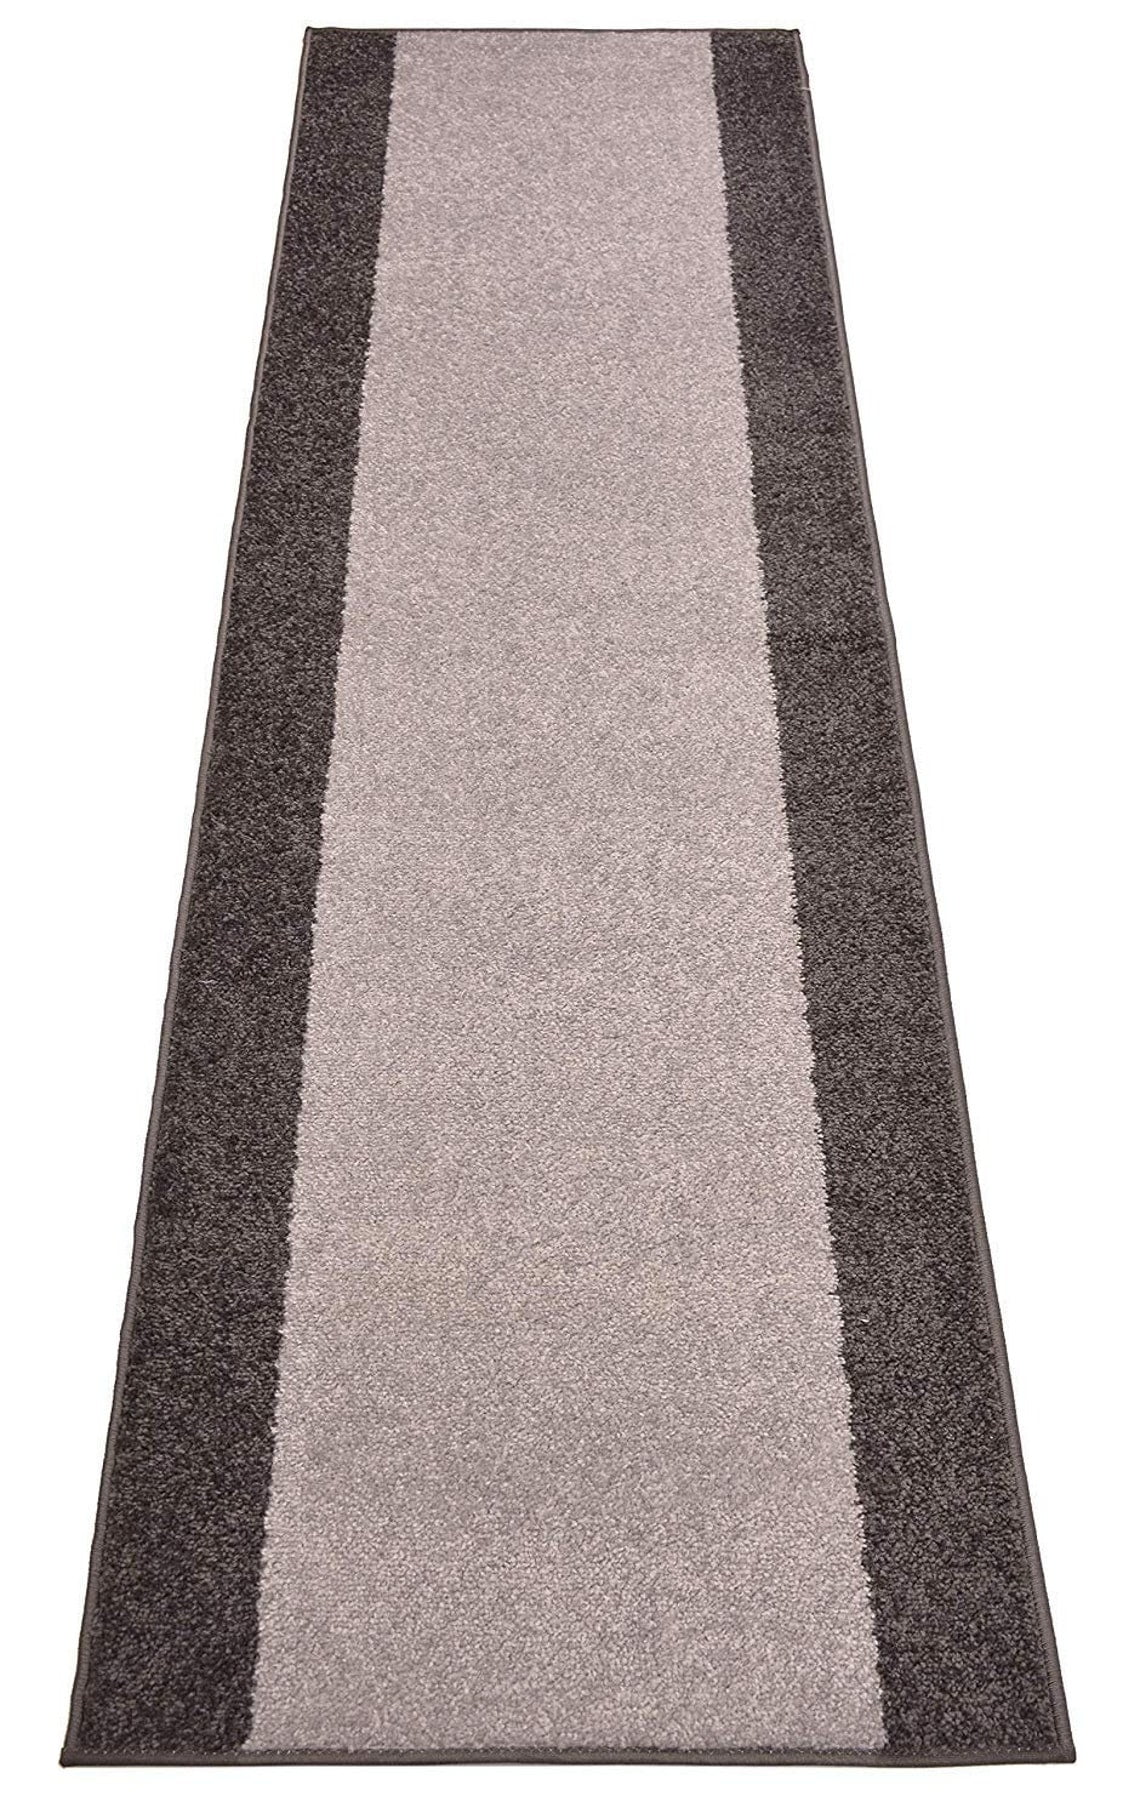 Details about   Grey Anti Slip Flecked Washable Mats Cut To Measure Hall Runners Sold In Foot 